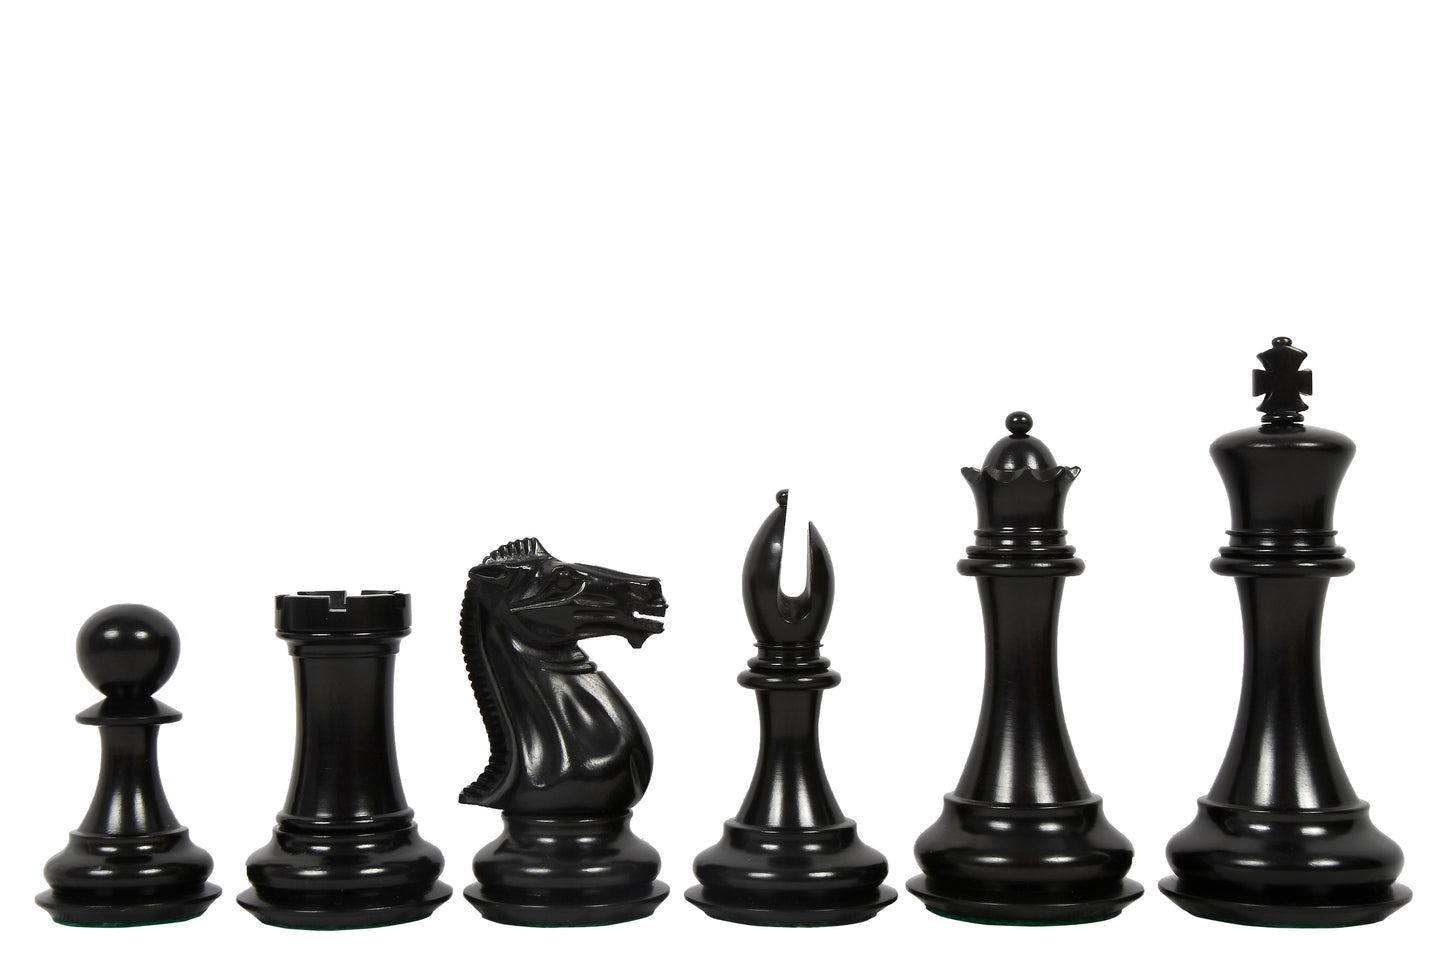 The Old Collector's Club Staunton Series Chess Pieces in Ebony and Boxwood - 4.4" King